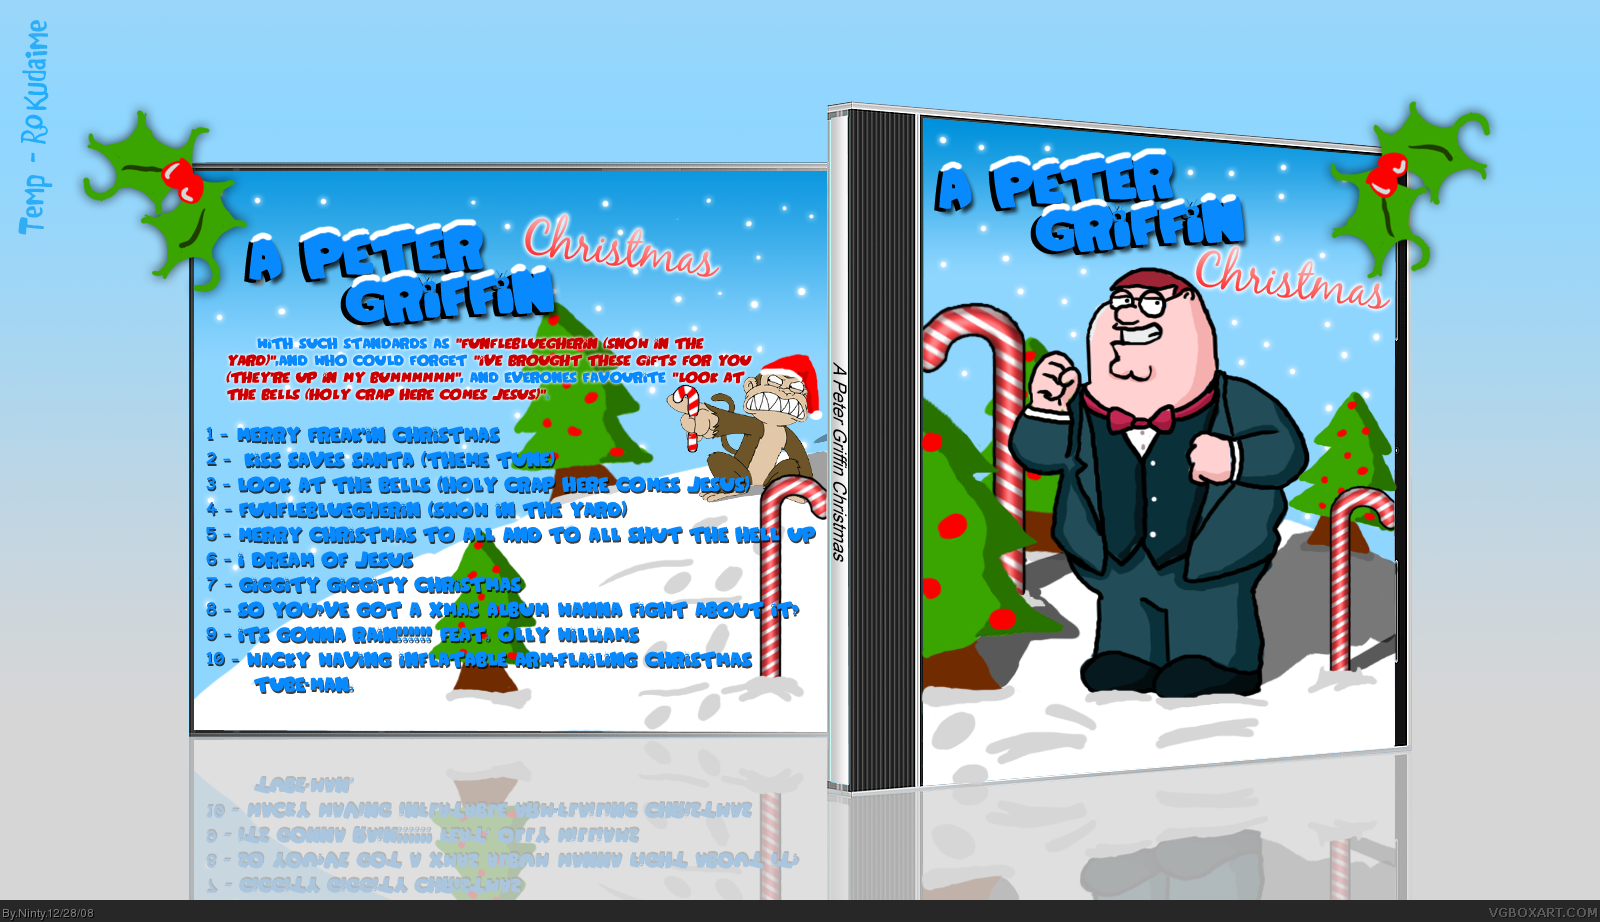 A Peter Griffin Christmas box cover